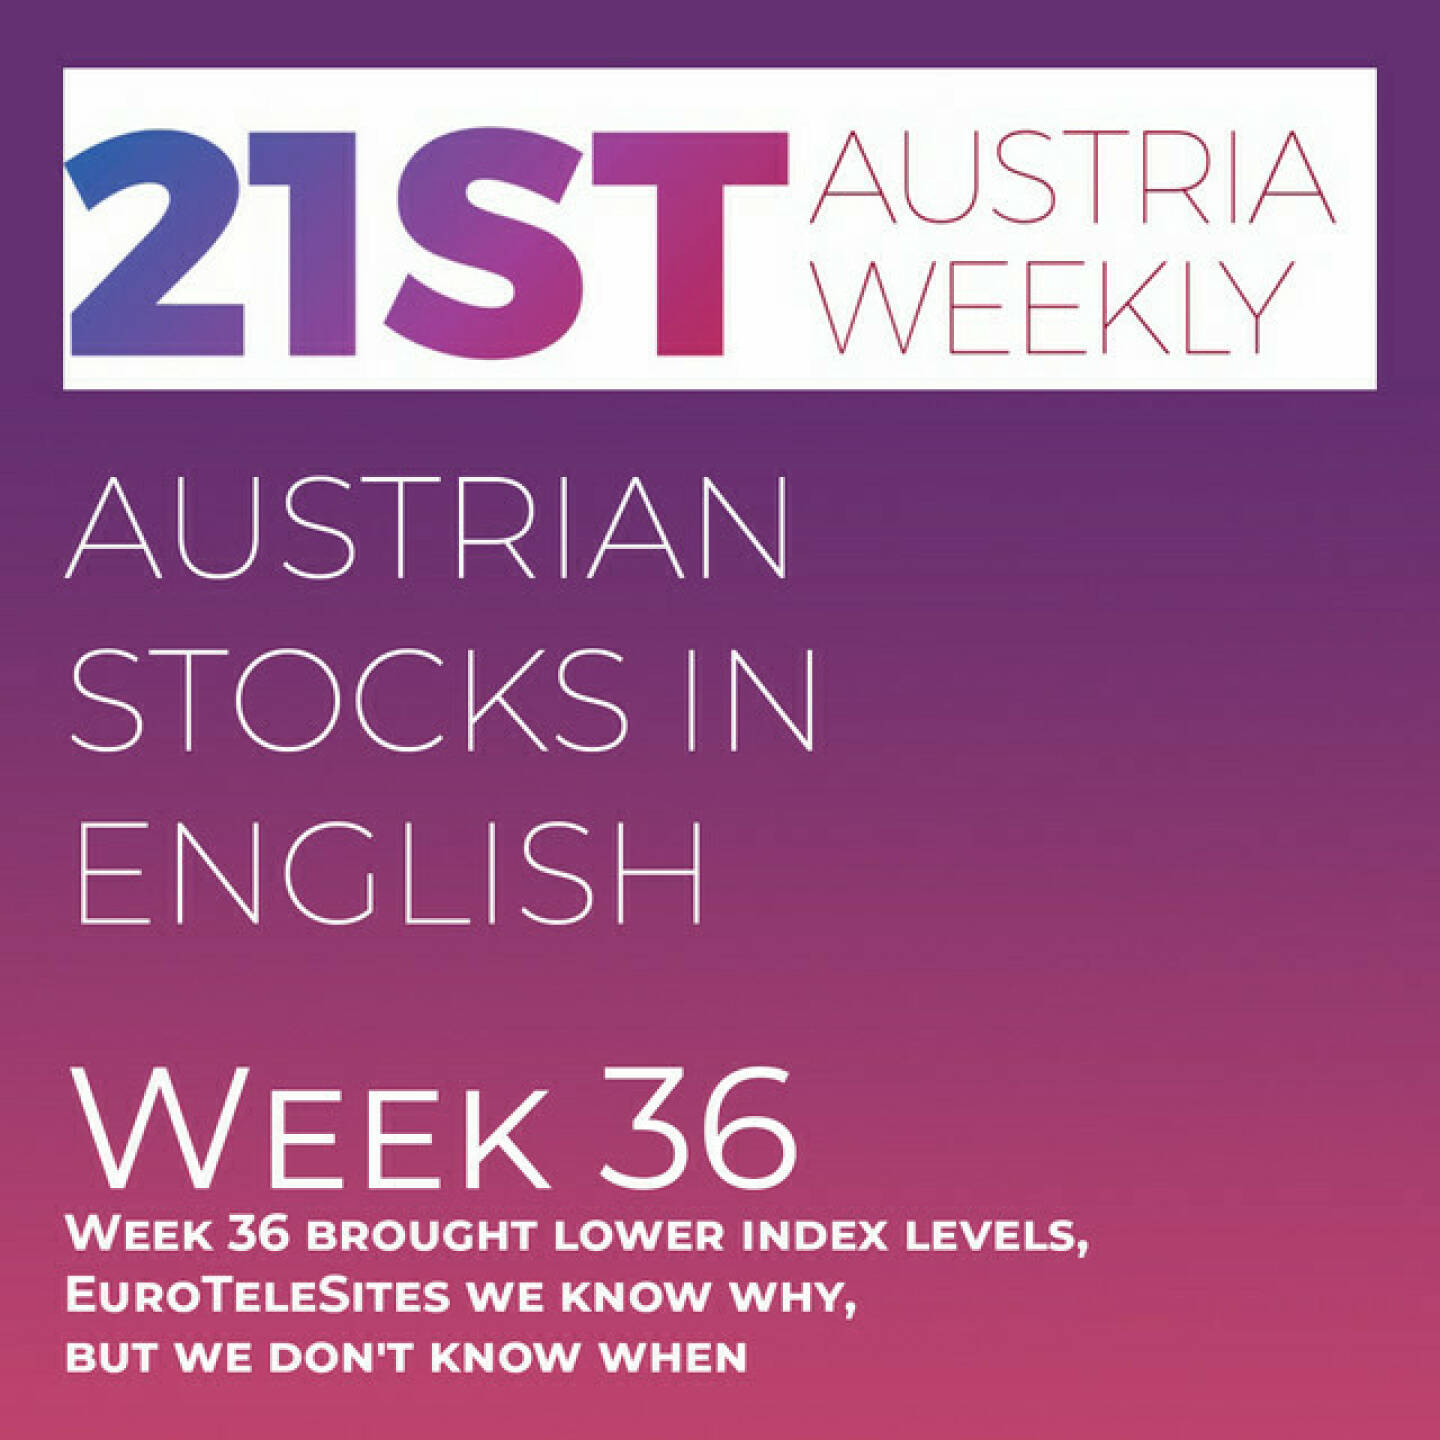 https://open.spotify.com/episode/3wcNRZS6dbfmIAmjLCMpUk
Austrian Stocks in English: Week 36 brought lower index levels, EuroTeleSites we know why, but we don't know when - <p>Welcome  to &#34;Austrian Stocks in English - presented by Palfinger&#34;, the english spoken weekly Summary for the Austrian Stock Market,  positioned every Sunday in the mostly german languaged Podcast &#34;Audio-CD.at Indie Podcasts&#34;- Wiener Börse, Sport Musik und Mehr“ .<br/><br/>This week in our 21st Austria weekly: After a good September Start week 36 brought lower levels for Austrian Indices, Main topic remains the forthcoming listing of EuroTeleSites, we know why, but we don&#39;t know when. News came from Vienna Airport, Andritz, Kapsch TrafficCom (2), Zumtobel, Valneva and OMV, spoken by Alison.<br/><br/><a href=https://boerse-social.com/21staustria target=_blank>https://boerse-social.com/21staustria</a><br/><br/>Please rate my Podcast on Apple Podcasts (or Spotify): <a href=https://podcasts.apple.com/at/podcast/audio-cd-at-indie-podcasts-wiener-boerse-sport-musik-und-mehr/id1484919130 target=_blank>https://podcasts.apple.com/at/podcast/audio-cd-at-indie-podcasts-wiener-boerse-sport-musik-und-mehr/id1484919130</a> .And please spread the word : <a href=https://www.boerse-social.com/21staustria target=_blank>https://www.boerse-social.com/21staustria</a> - the address to subscribe to the weekly summary as a PDF.</p>